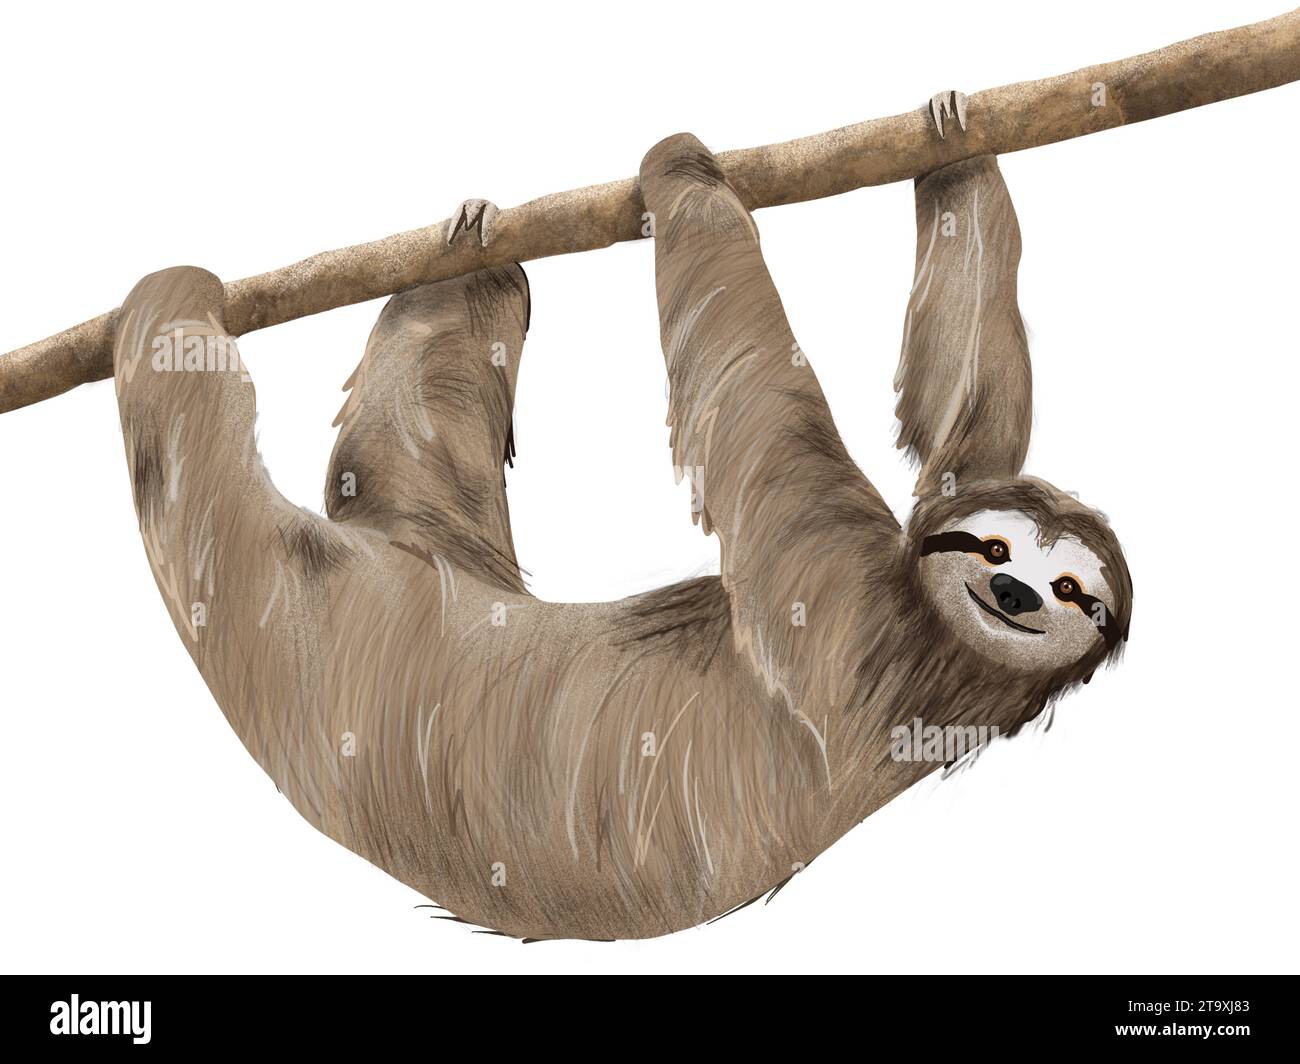 Cute sloth hanging from a branch on white background illustration Stock Photo